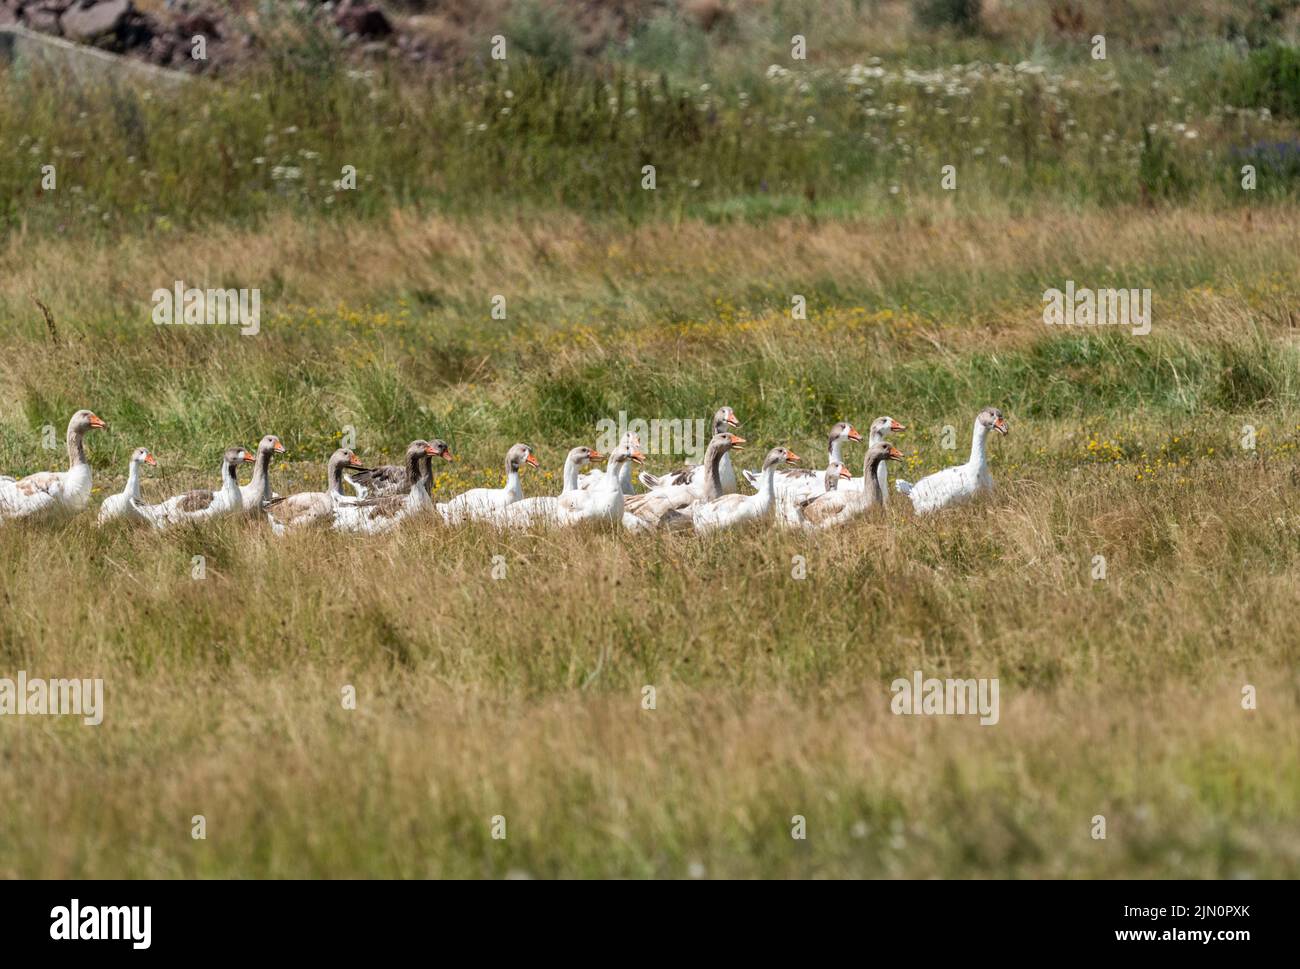 Domestic Geese walking Stock Photo